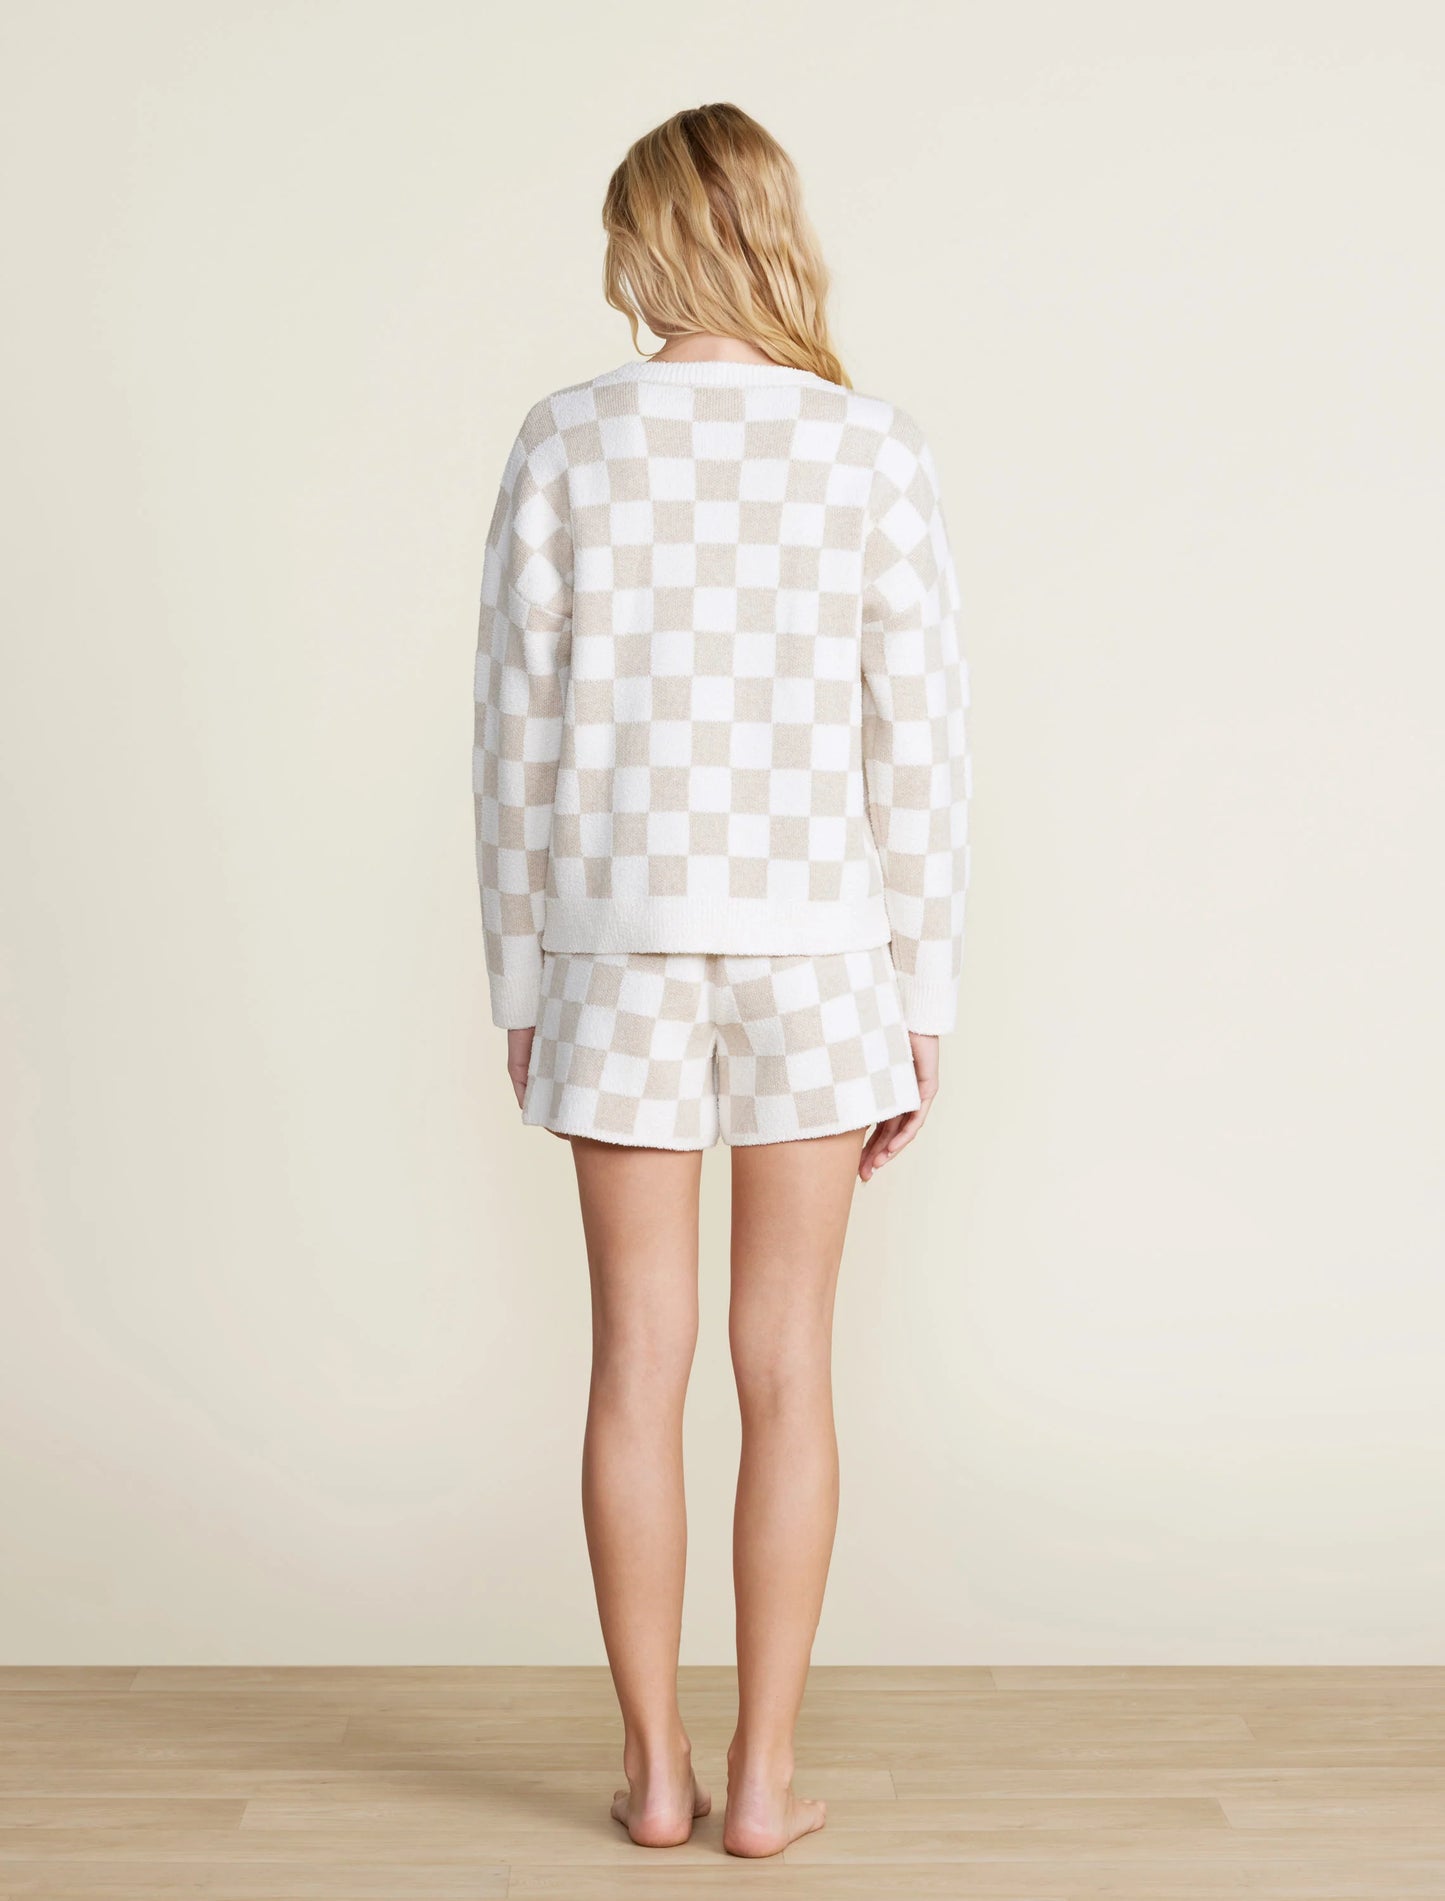 Barefood Dreams -CozyChic® Cotton Checkered Pullover - Findlay Rowe Designs